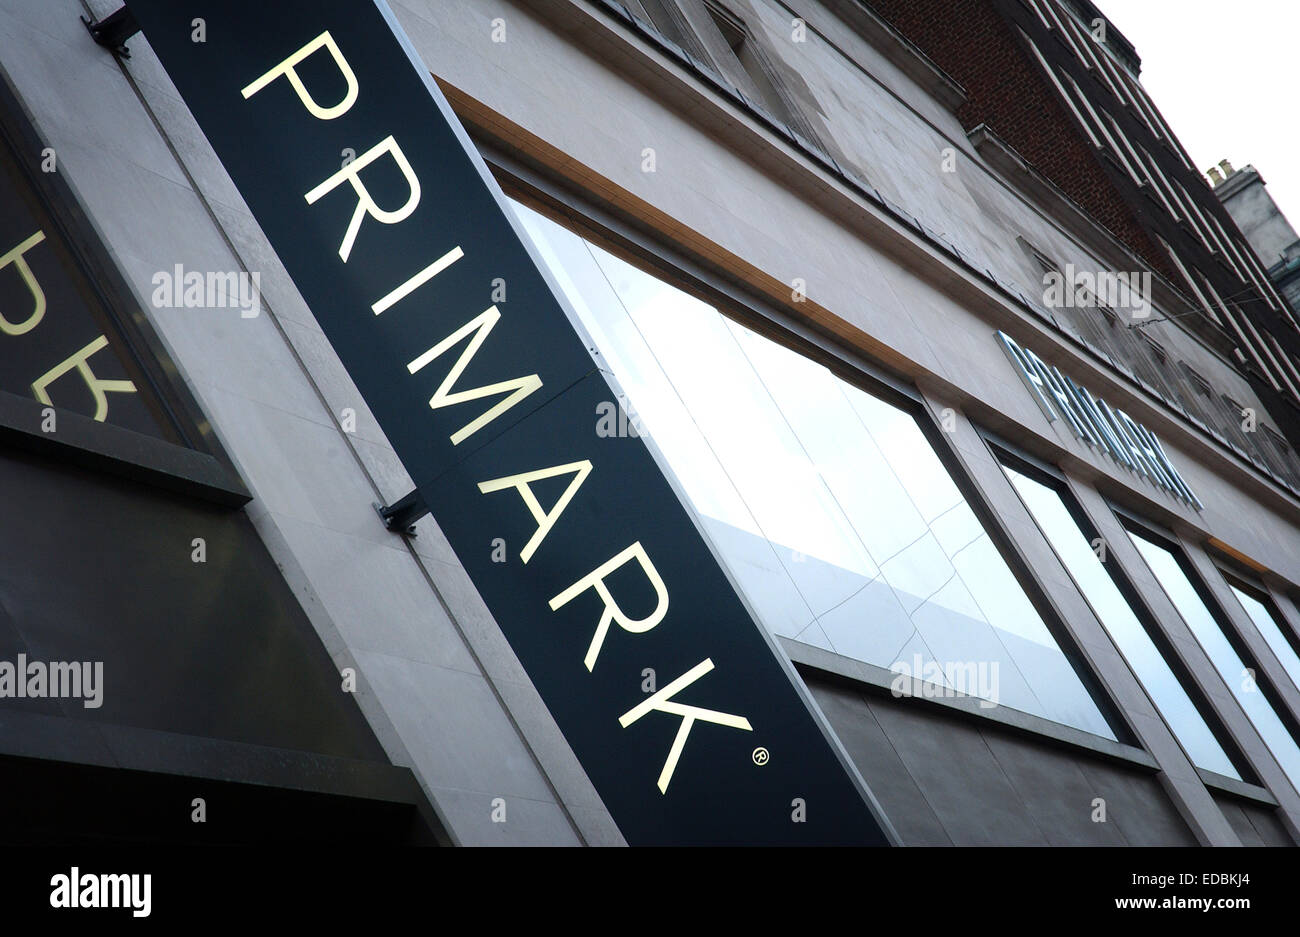 Exterior of the flagship Primark store on Oxford Street, am Associated British Foods brand. Stock Photo